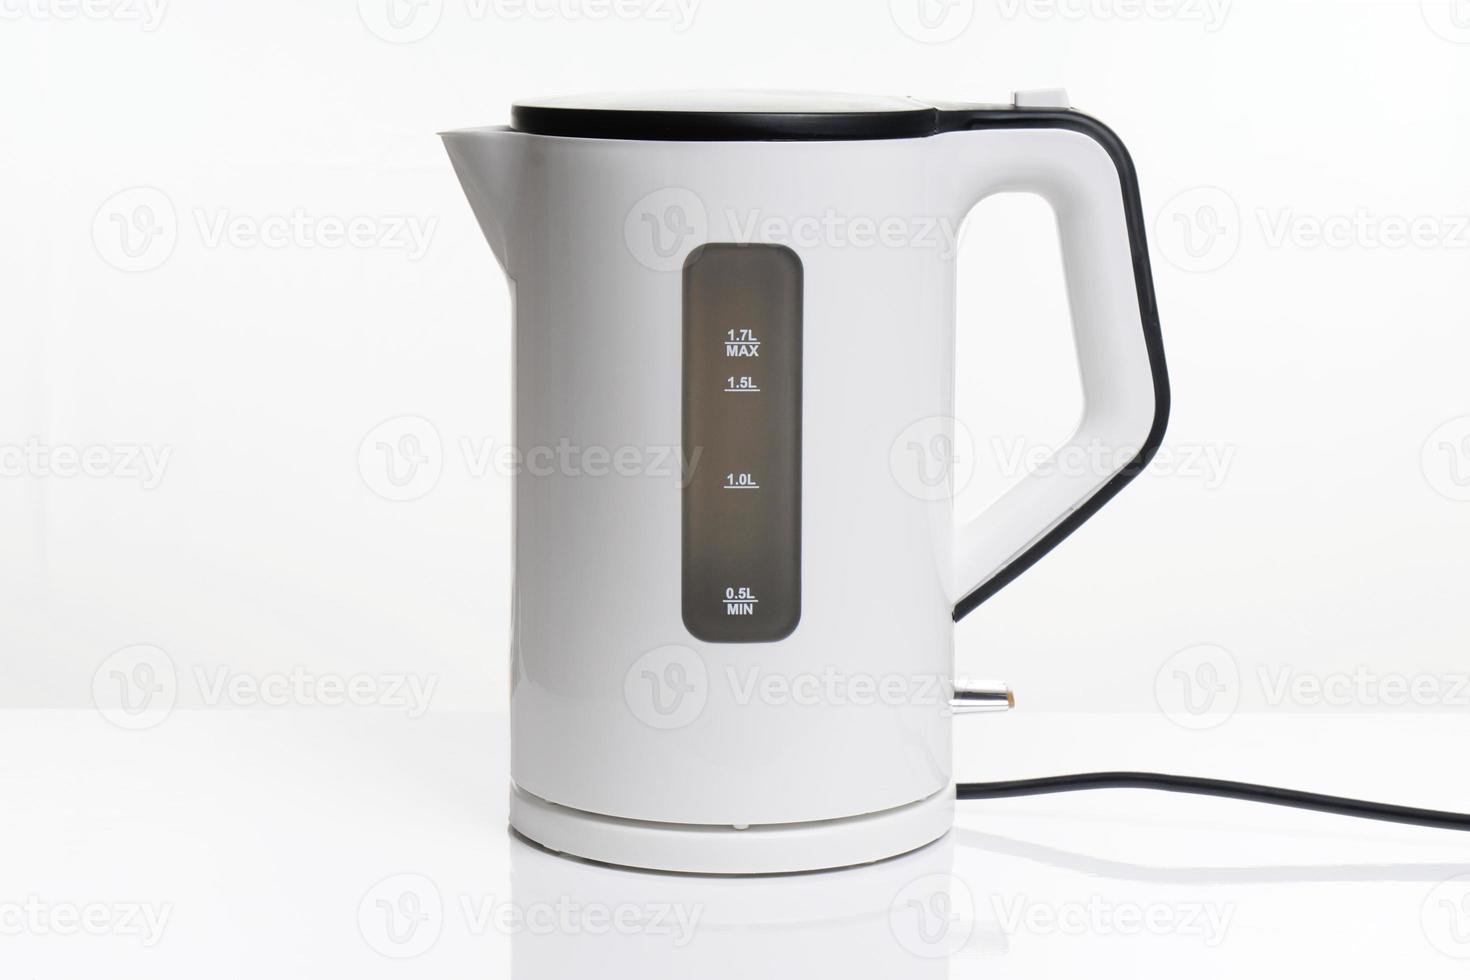 electric kettle or water boiler photo